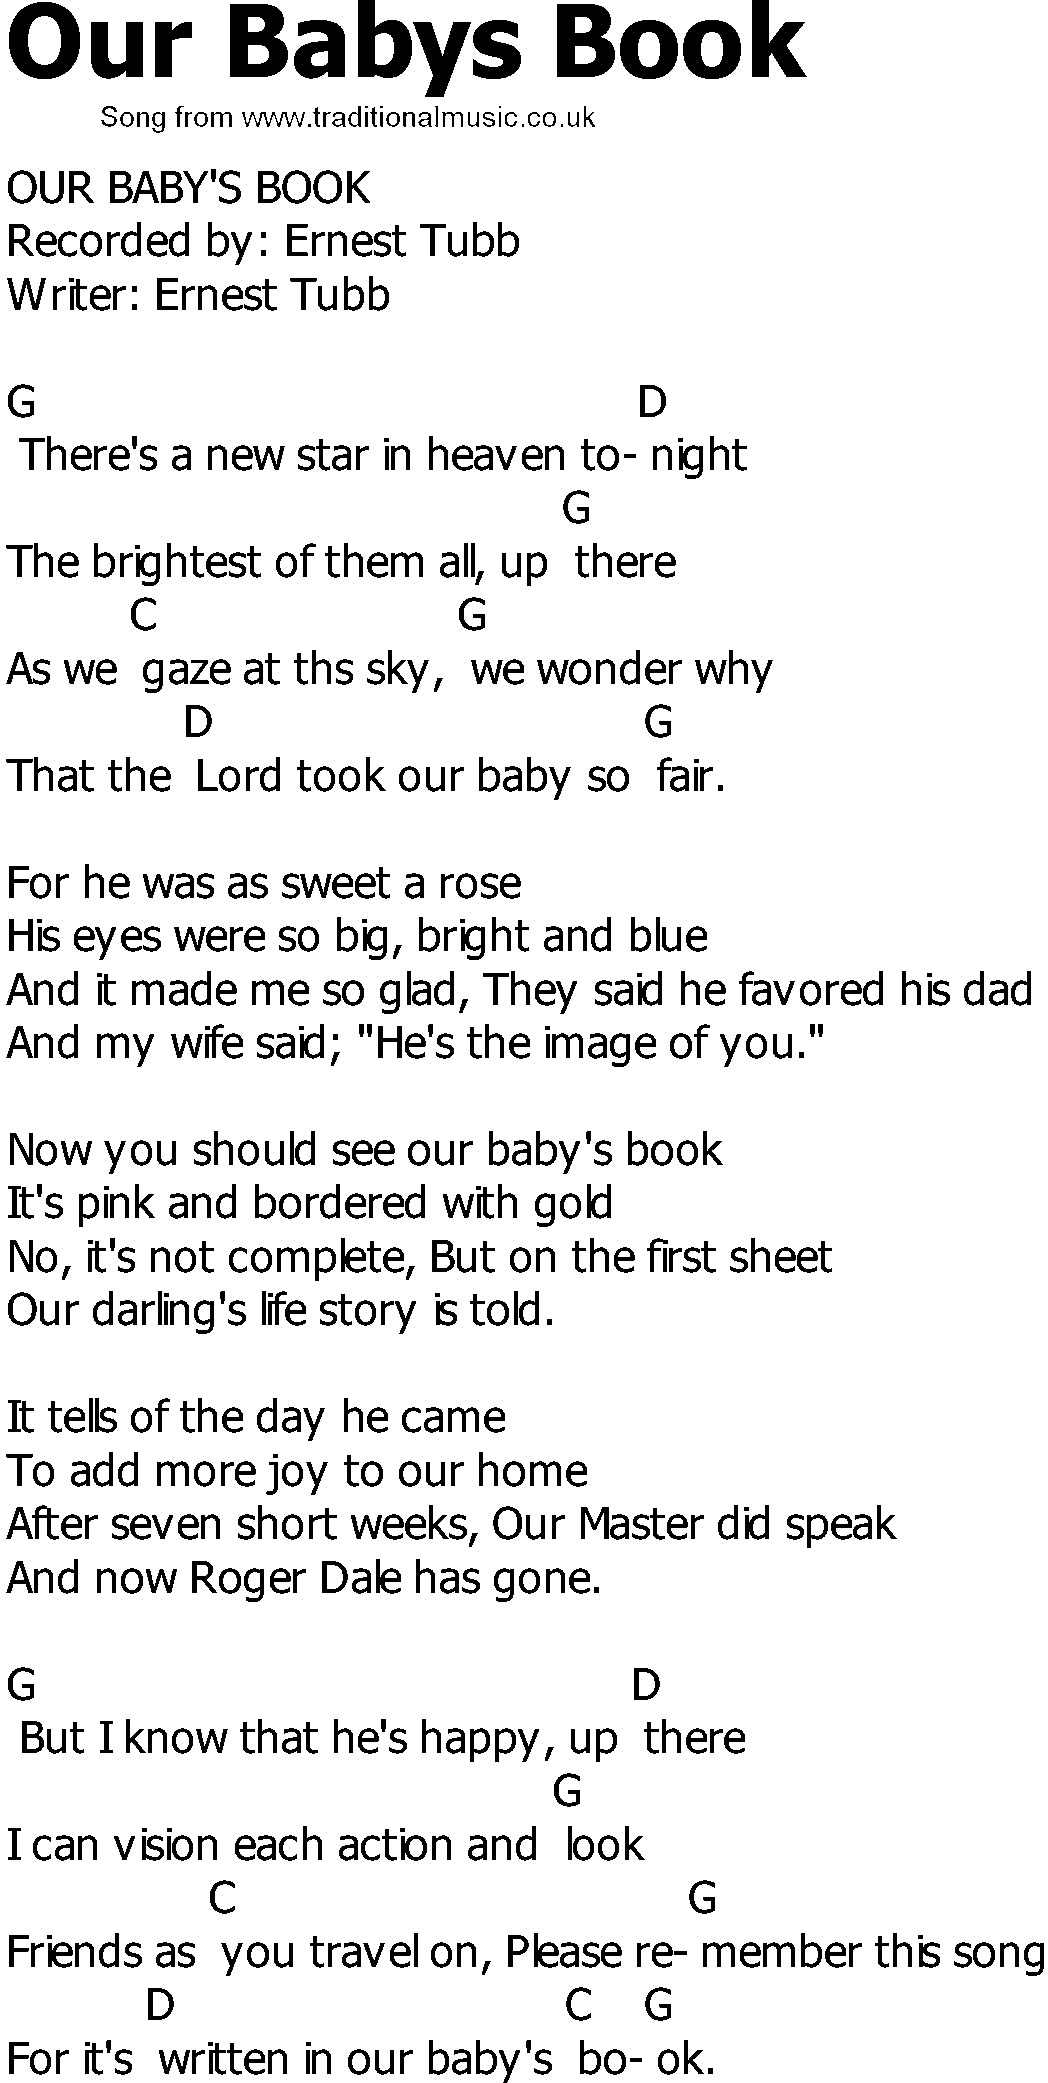 Old Country song lyrics with chords - Our Babys Book